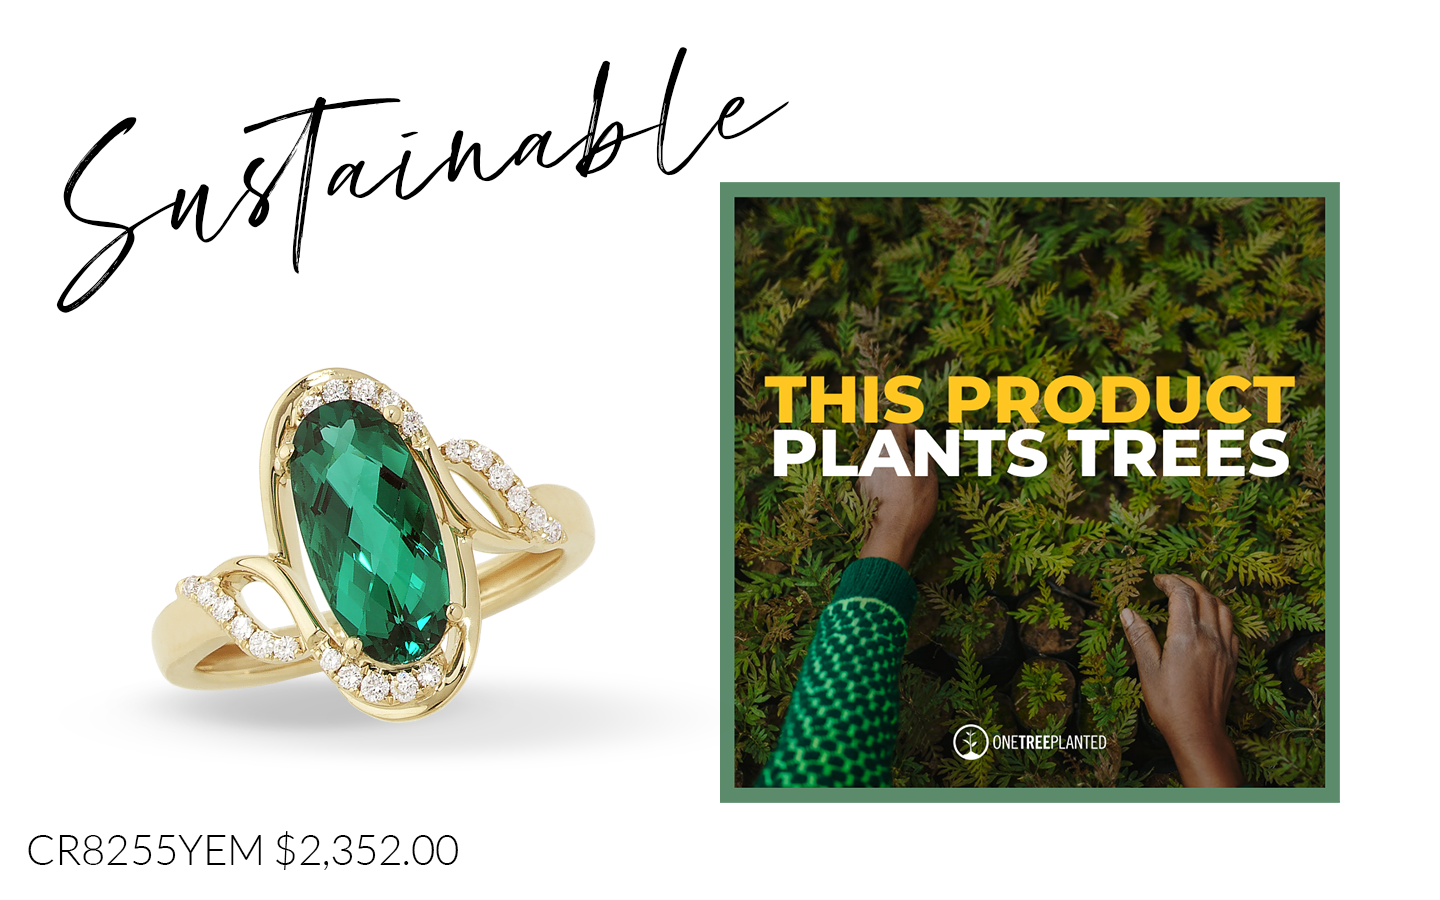 "Sustainable. This product plants trees."  Emerald ring "CR8255YEM $2,352.00"